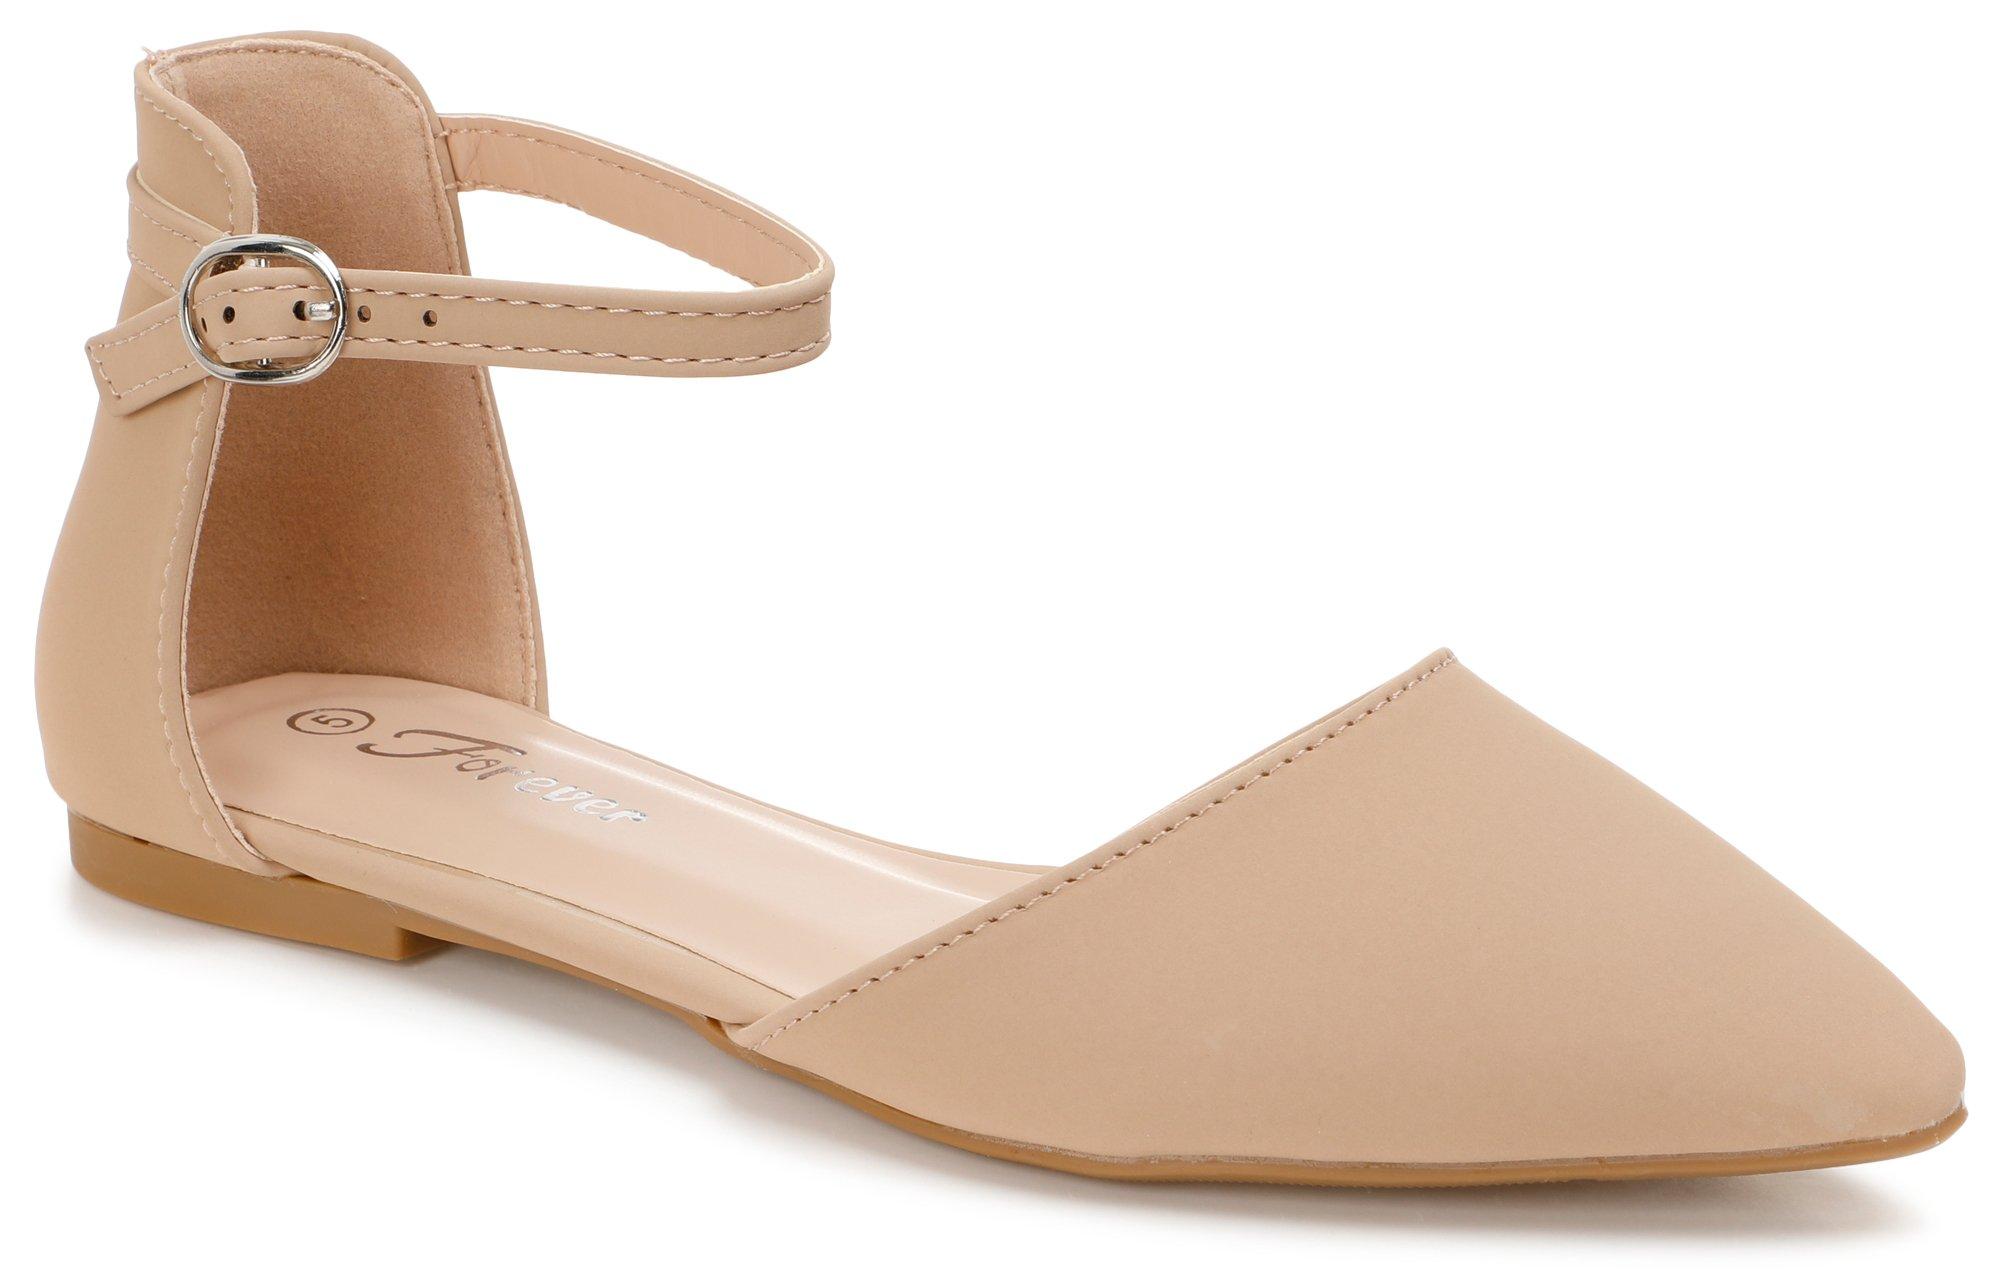 Women's Solid Pointed Flats